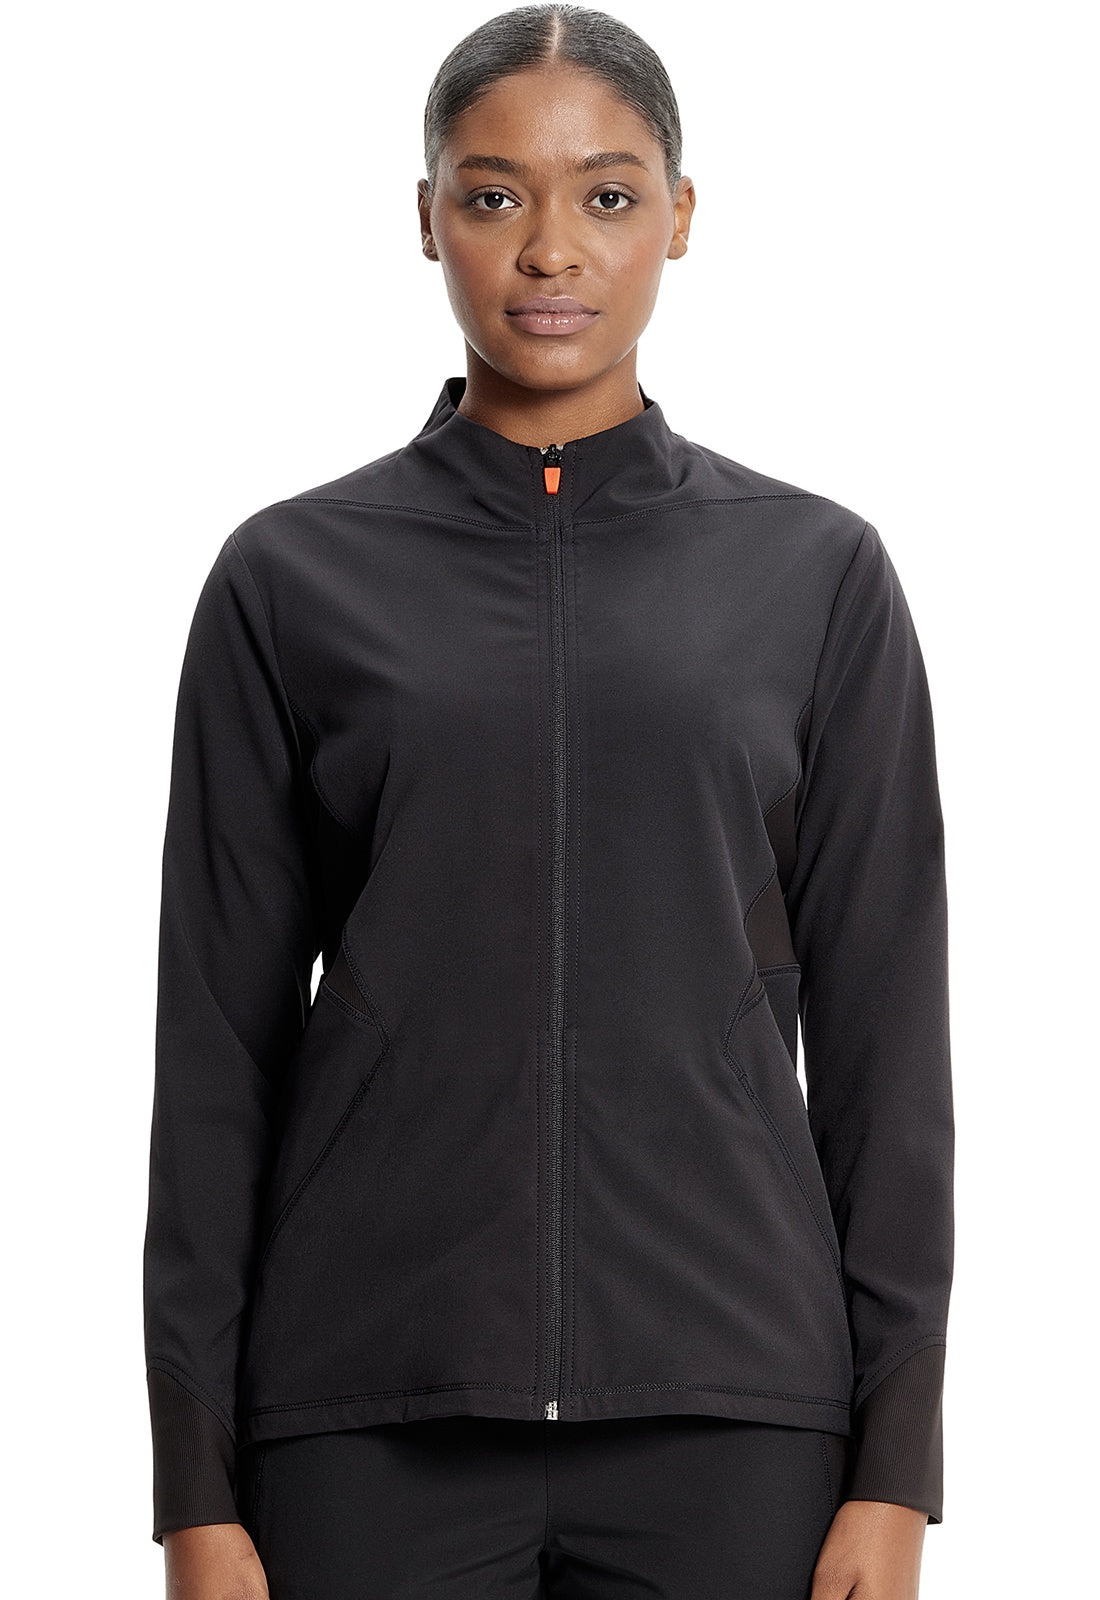 IN320A - Infinity GNR8 Zip Front Jacket